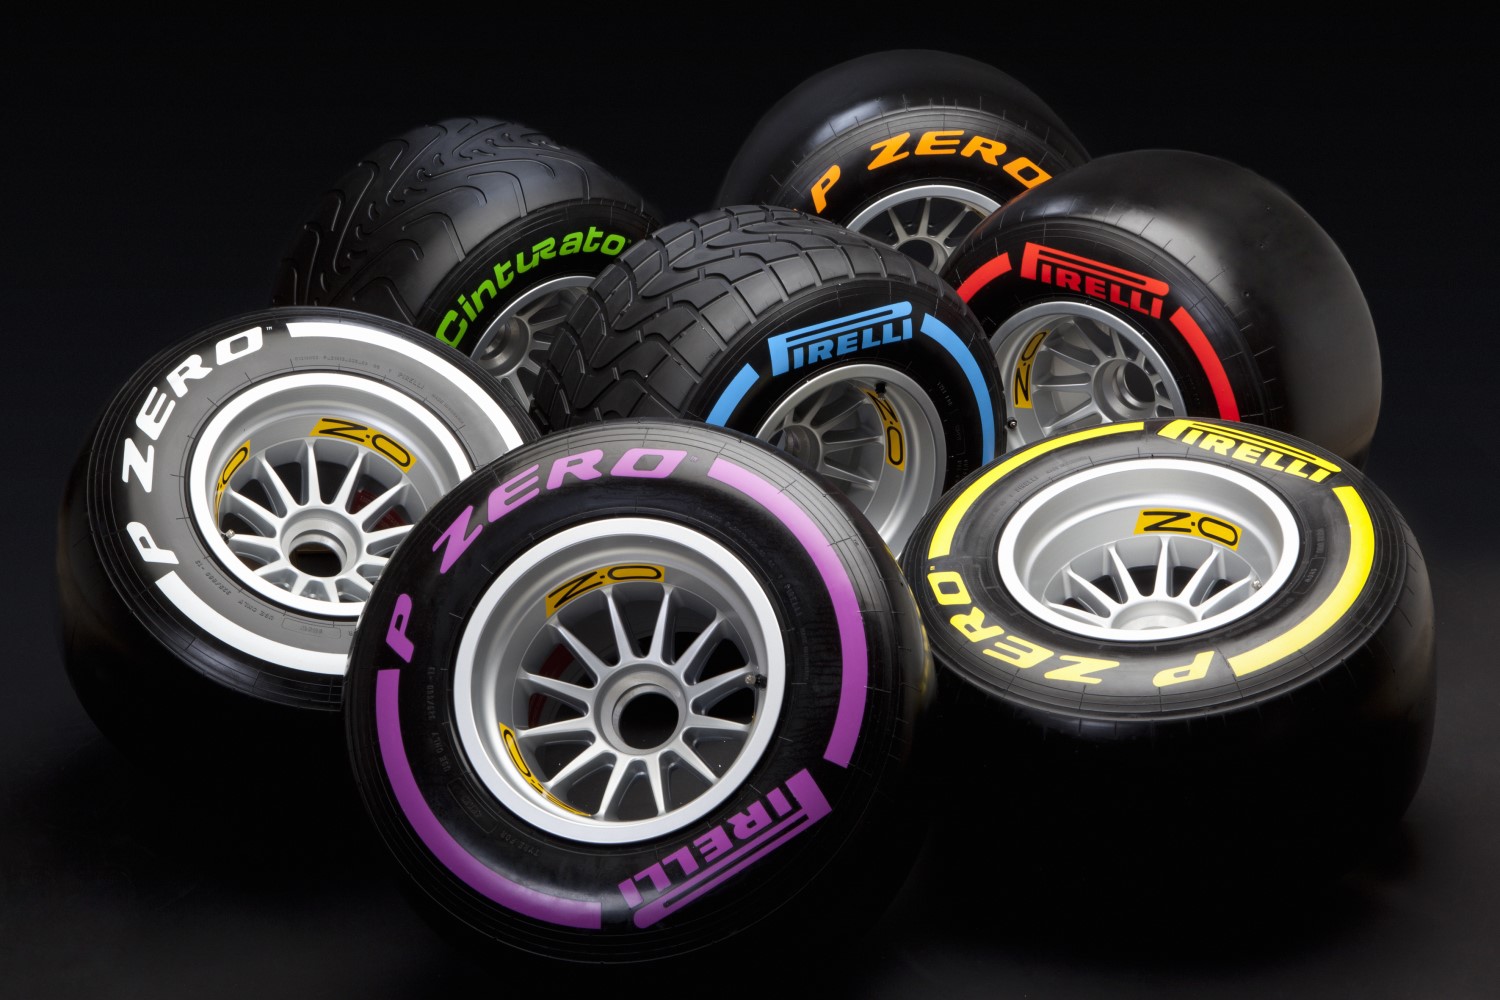 Teams expected to reject stiffer sidewall tires for 2016